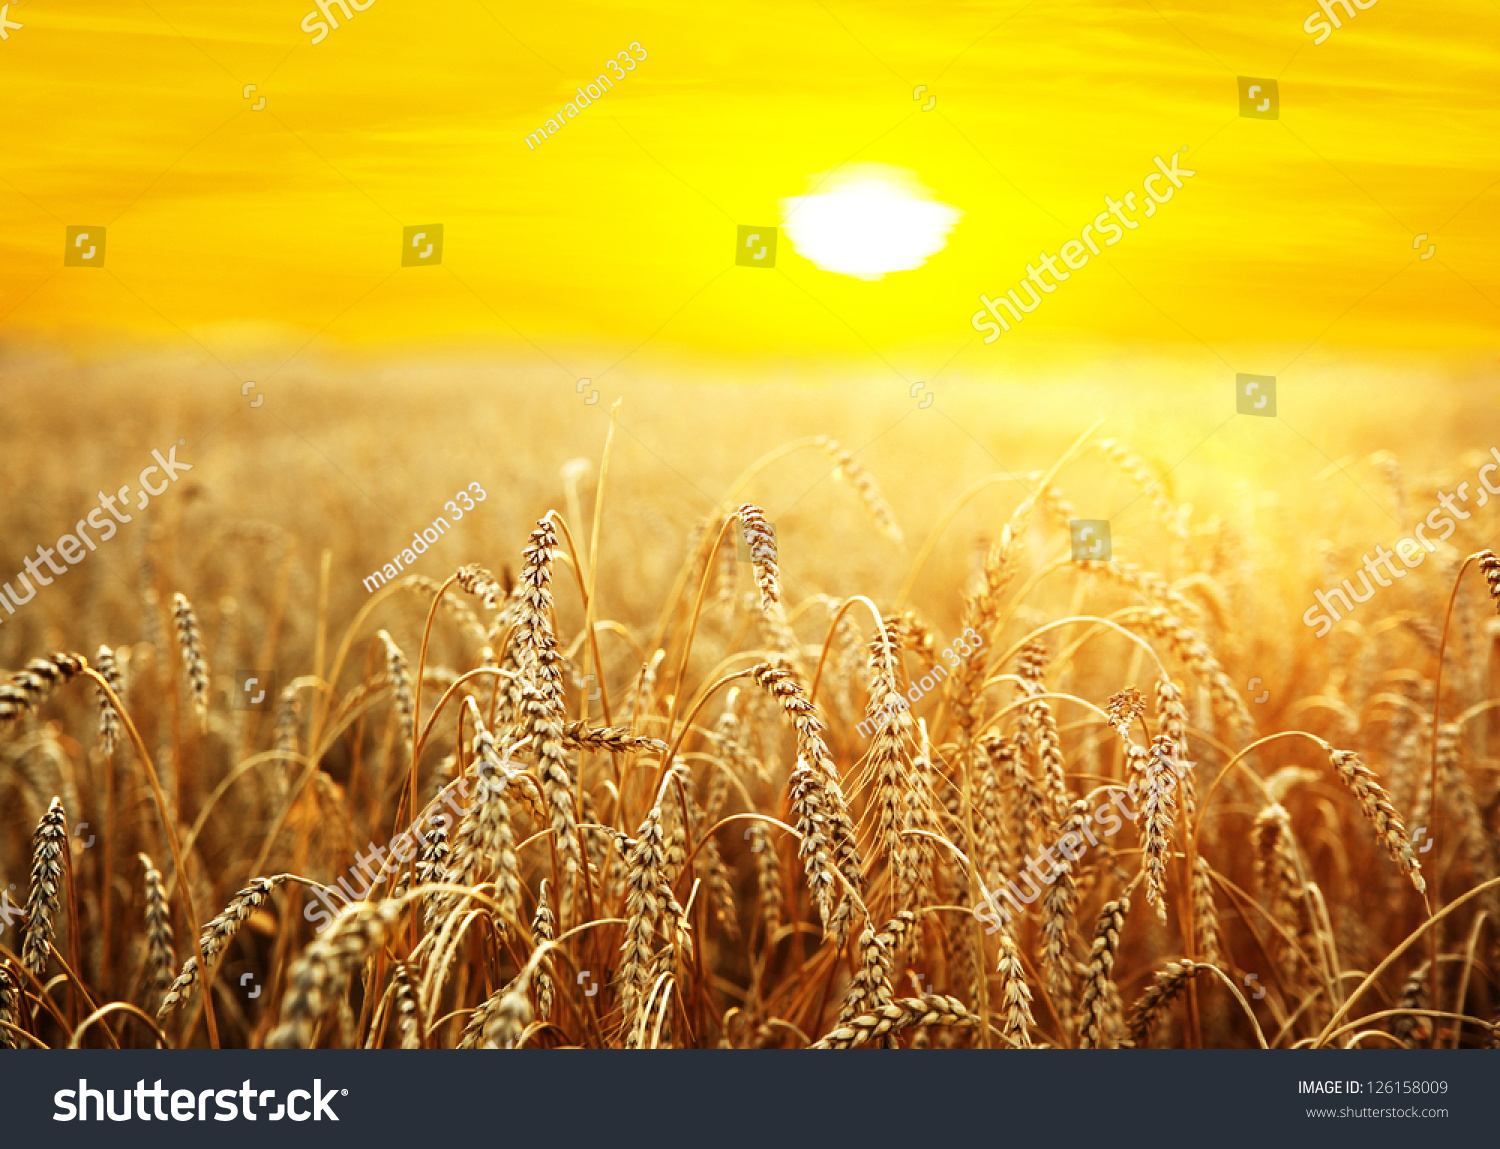 ripening ears of wheat field on the background of the setting sun #126158009